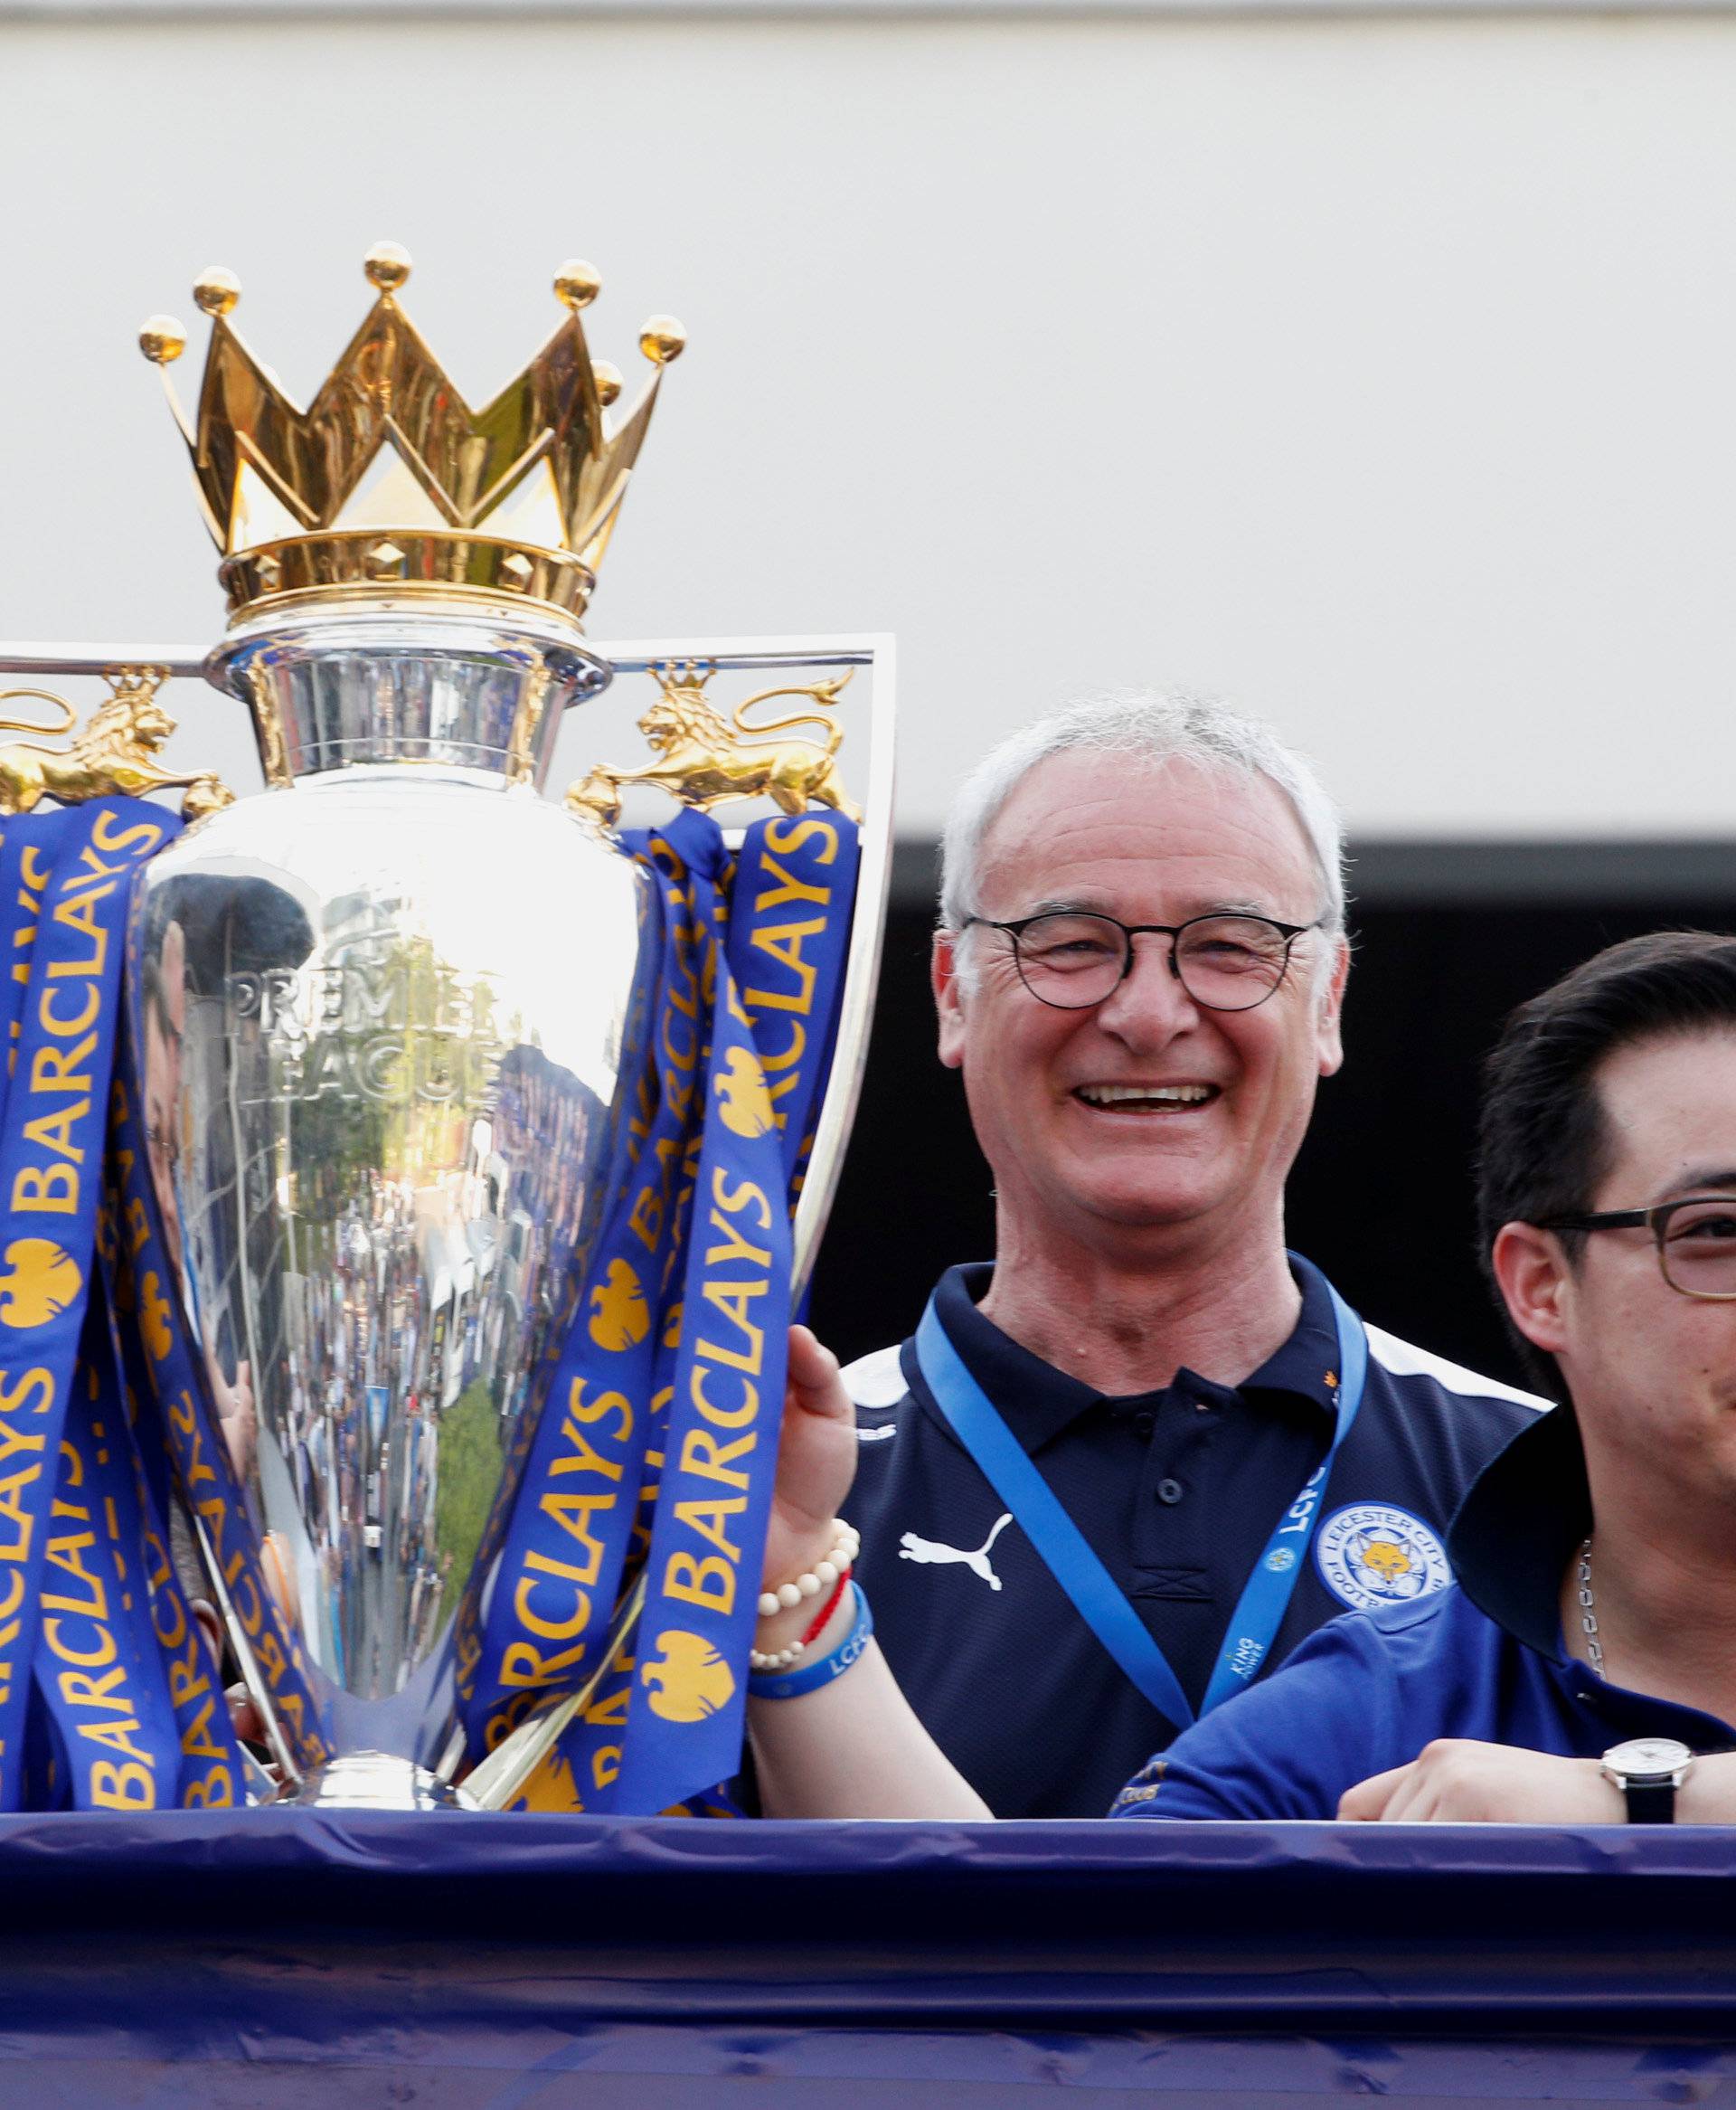 Leicester City soccer club's team owner Vichai Srivaddhanaprabha, manager Claudio Ranieri and club's vice chairman Aiyawatt Srivaddhanaprabha are seen during a parade in Bangkok